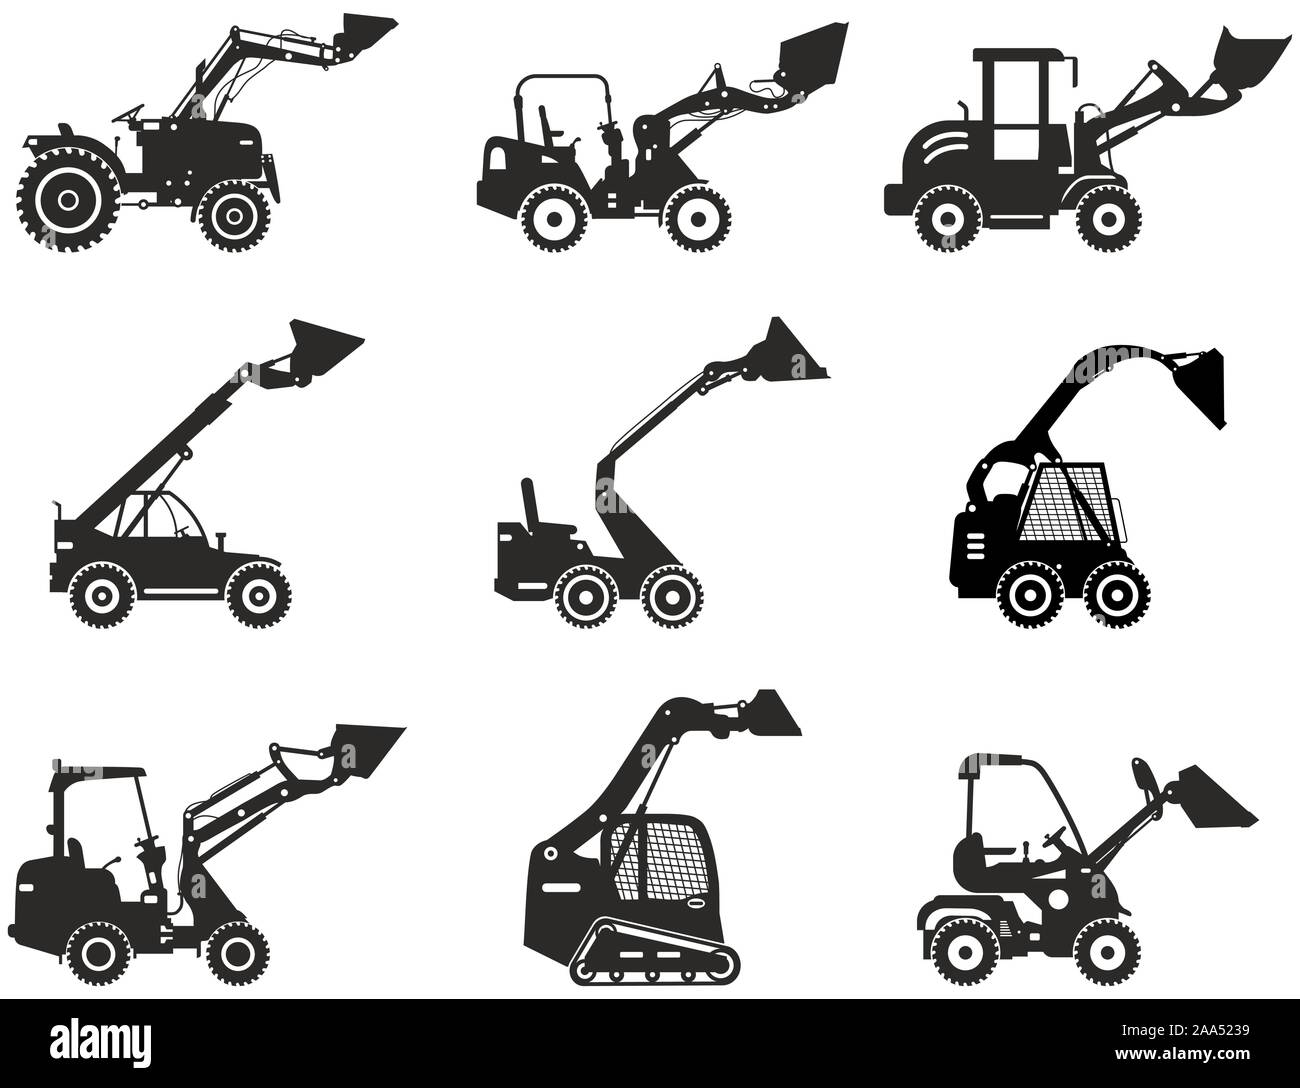 Set of skid steer loaders. Silhouette of heavy construction equipment and mining machine in flat style on the white background. Building machinery Stock Vector